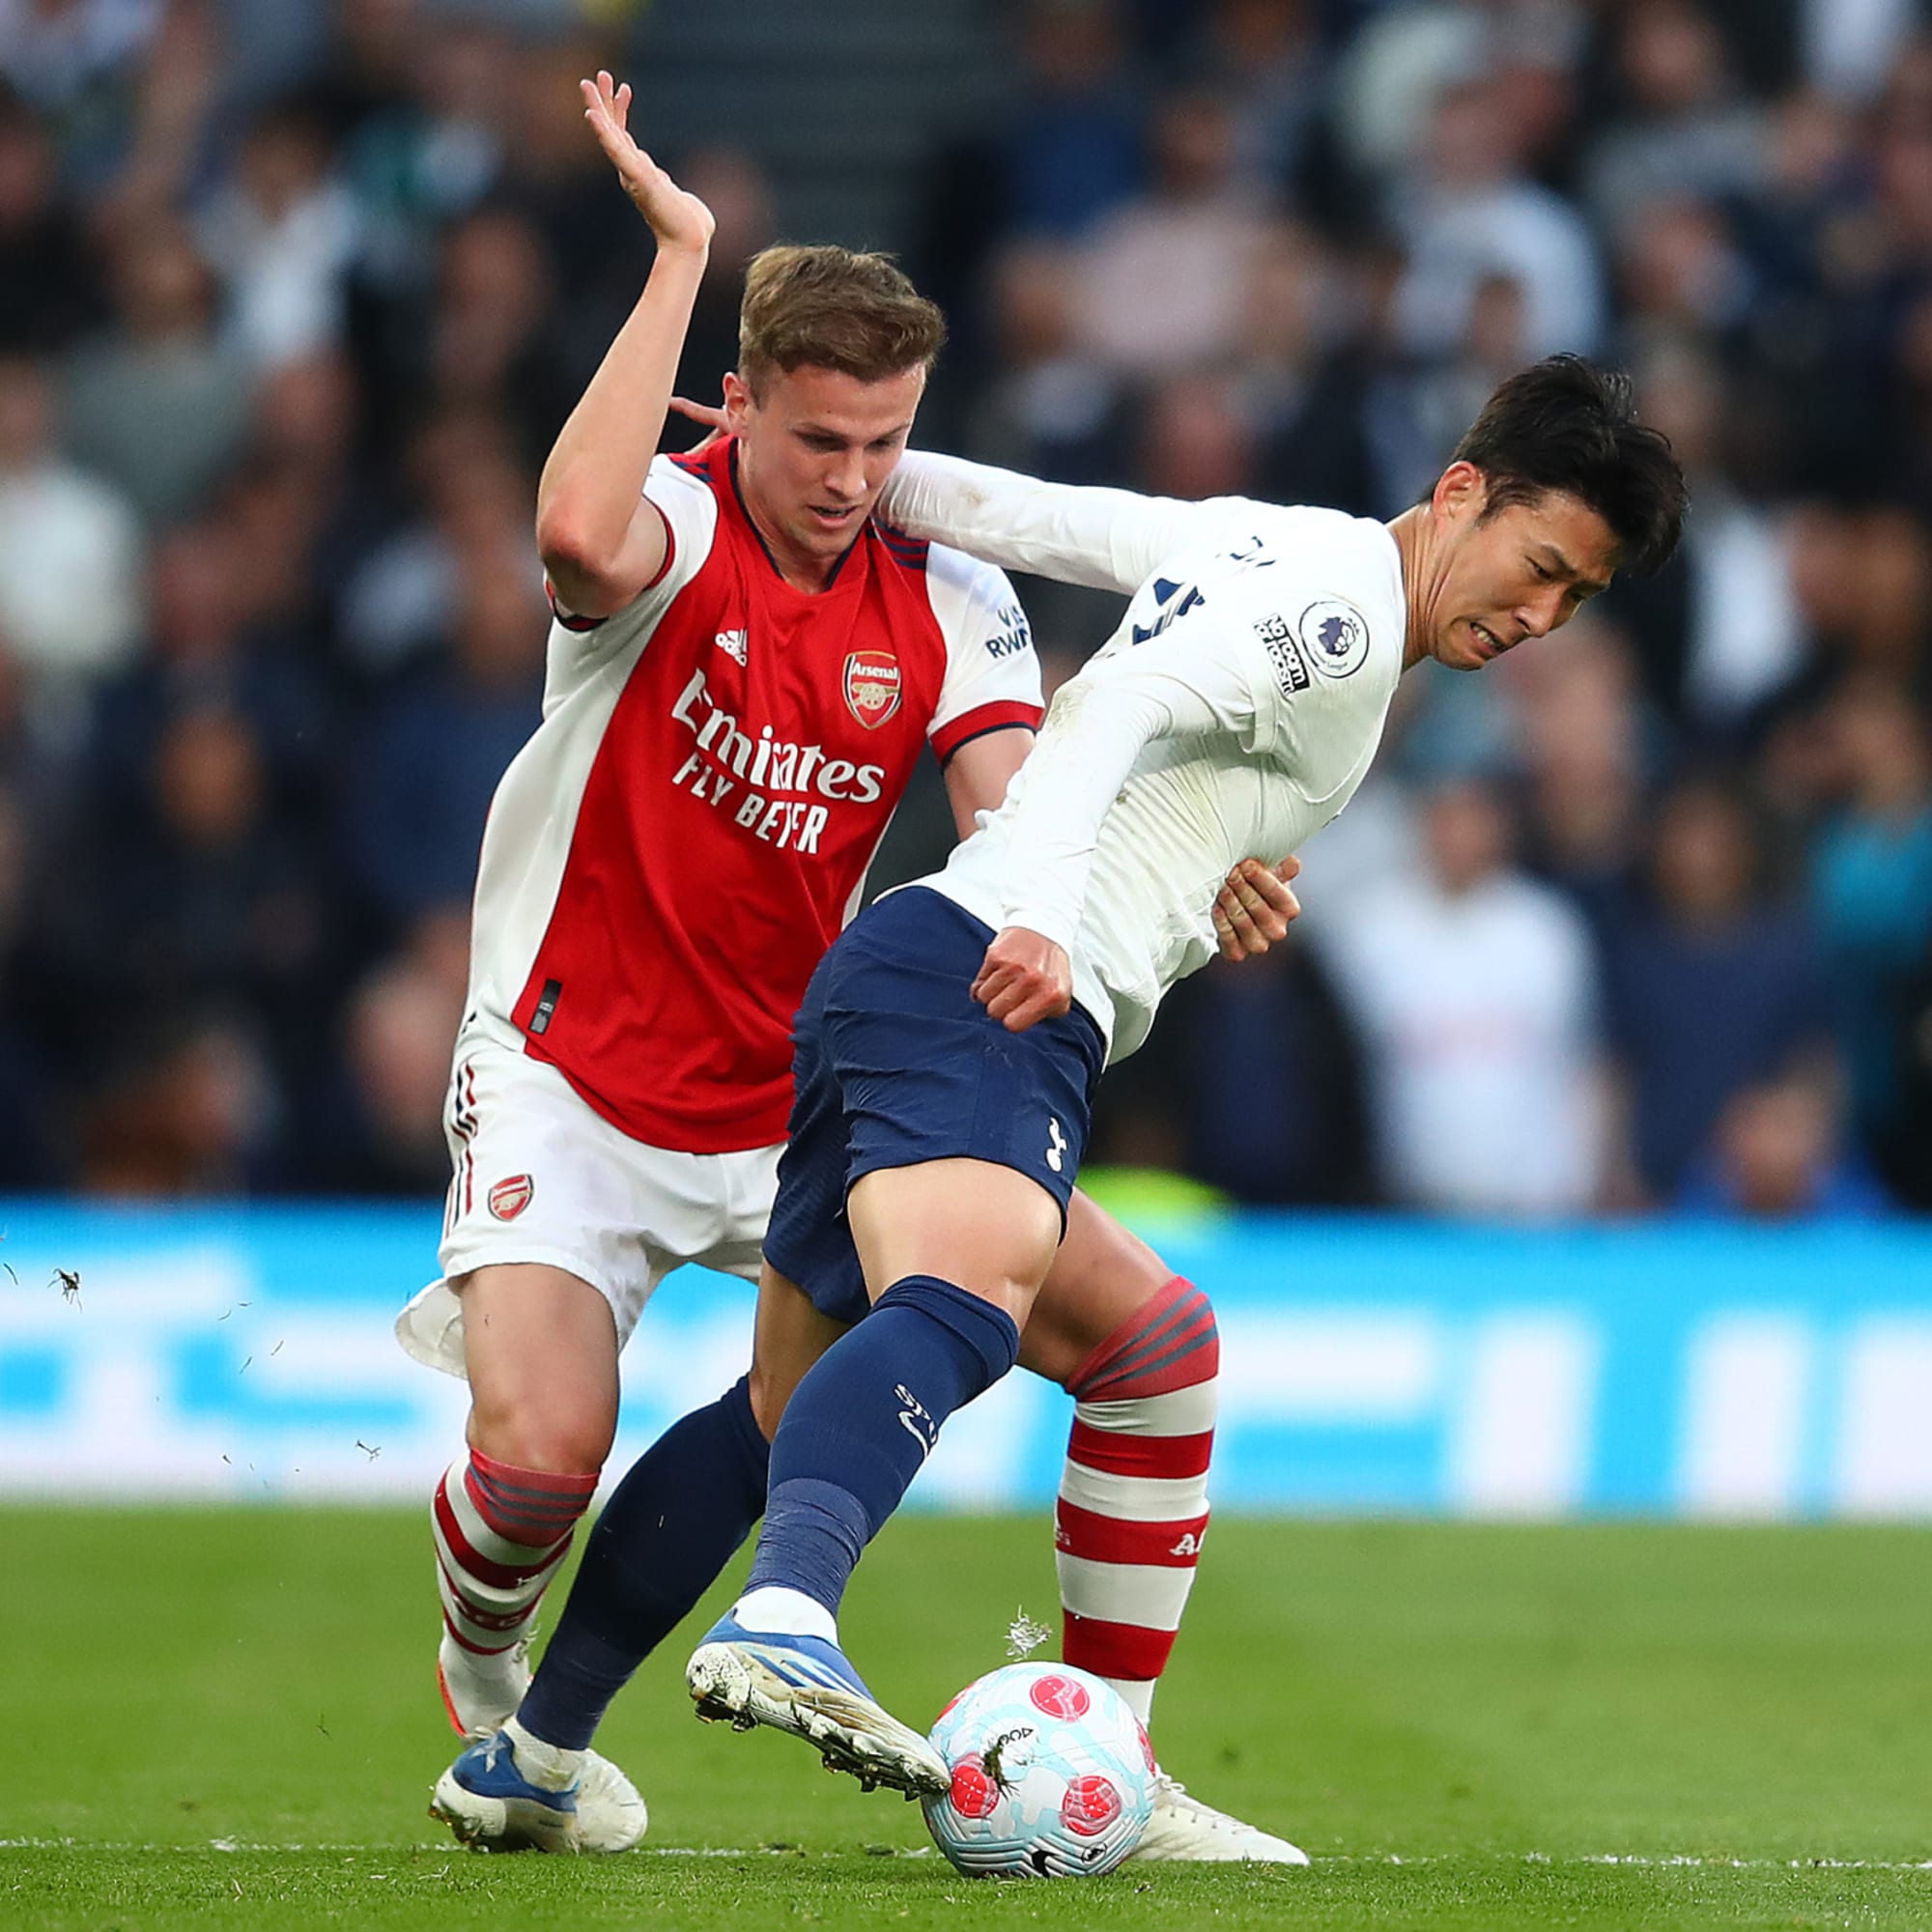 Five keys for Tottenham Hotspur to beat Arsenal in the EPL